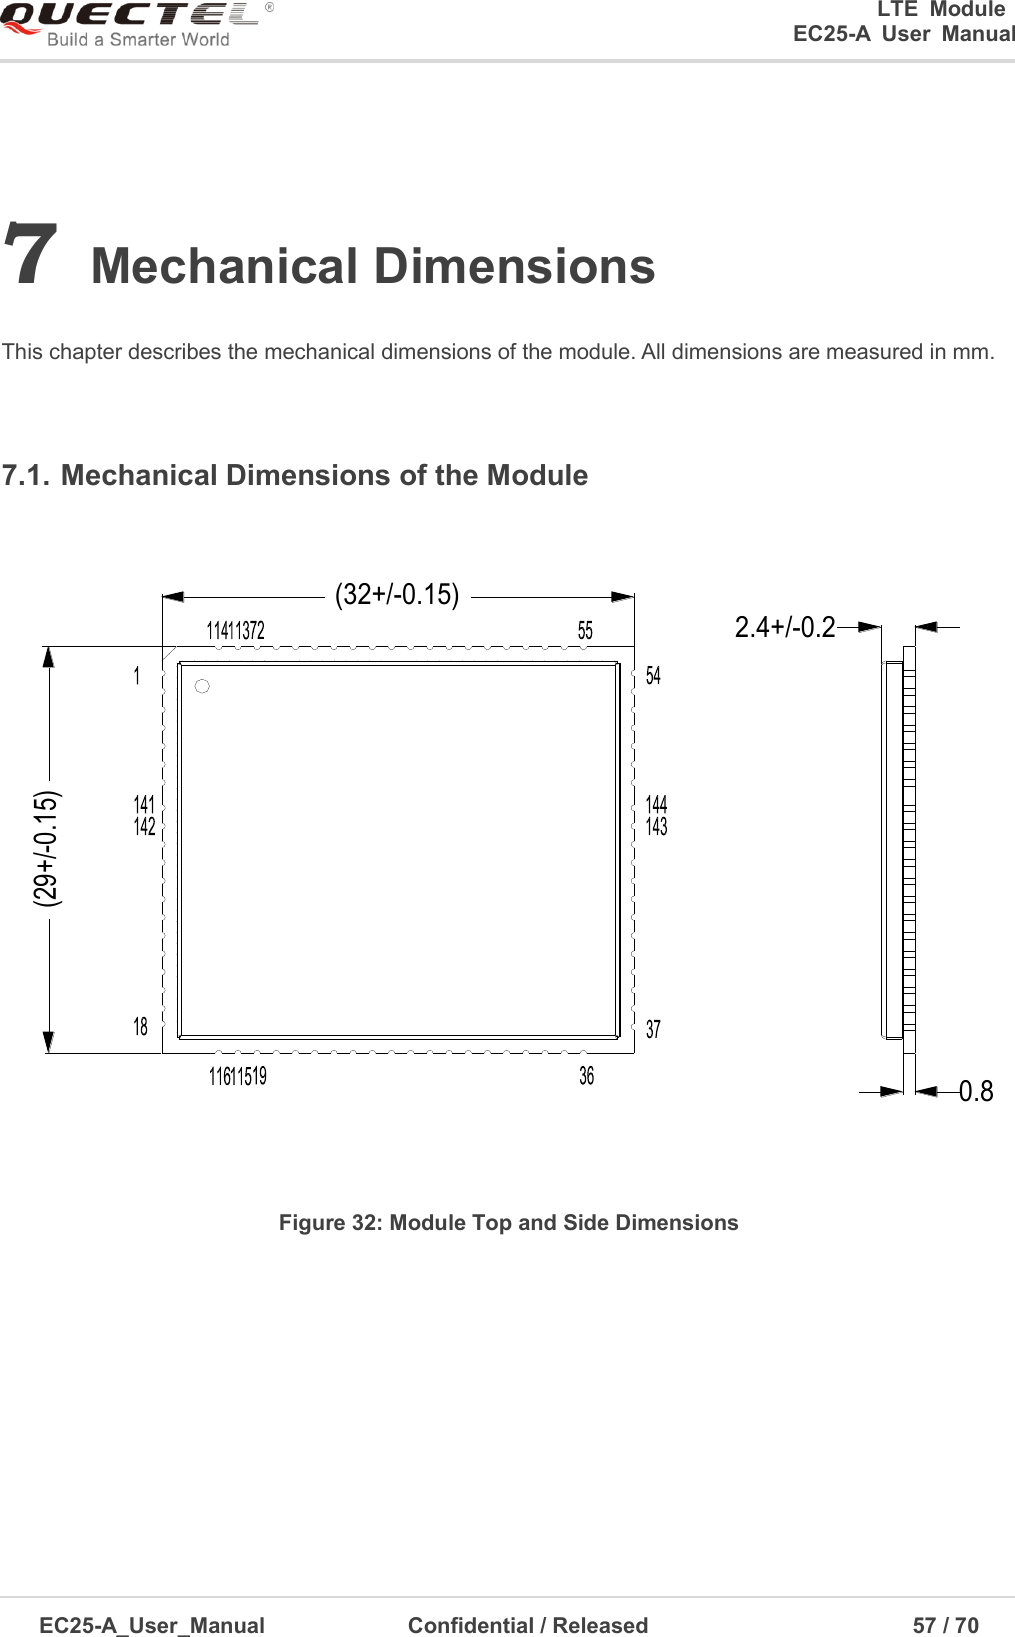 0      LTE  Module      EC25-A  User  Manual EC25-A_User_Manual  Confidential / Released      57 / 7  7 Mechanical DimensionsThis chapter describes the mechanical dimensions of the module. All dimensions are measured in mm. 7.1. Mechanical Dimensions of the Module (32+/-0.15)(29+/-0.15)0.82.4+/-0.2Figure 32: Module Top and Side Dimensions 